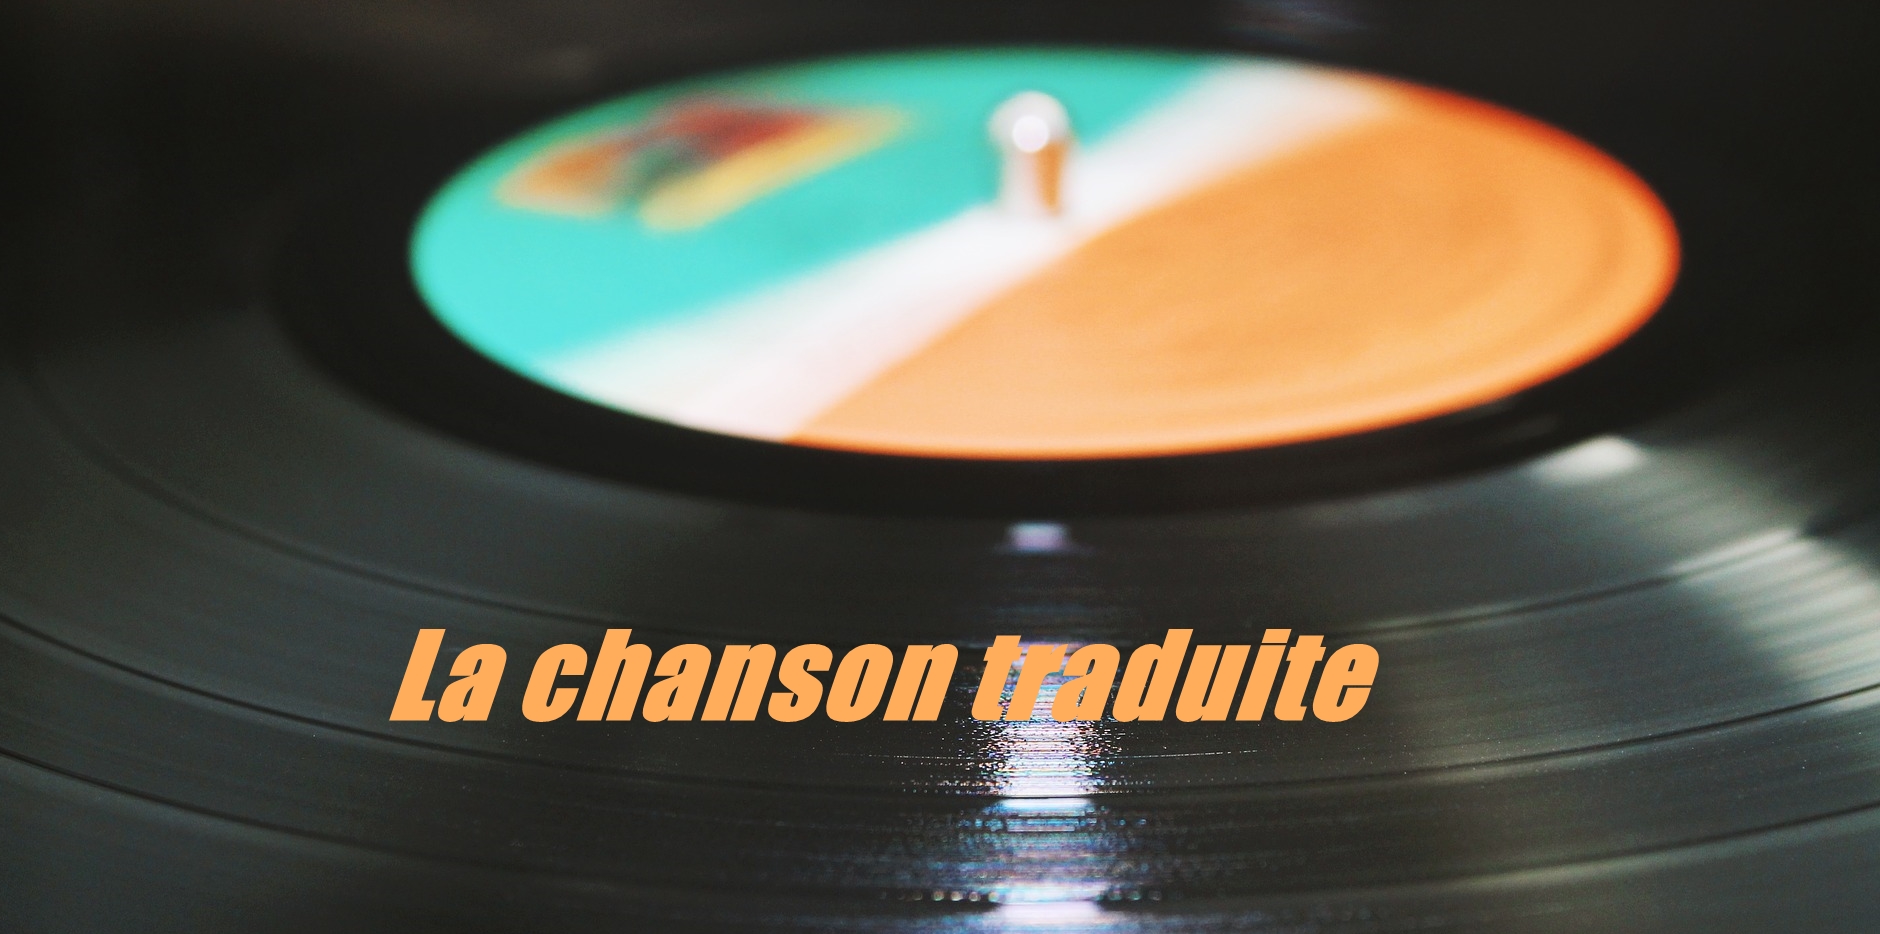 You are currently viewing La chanson traduite